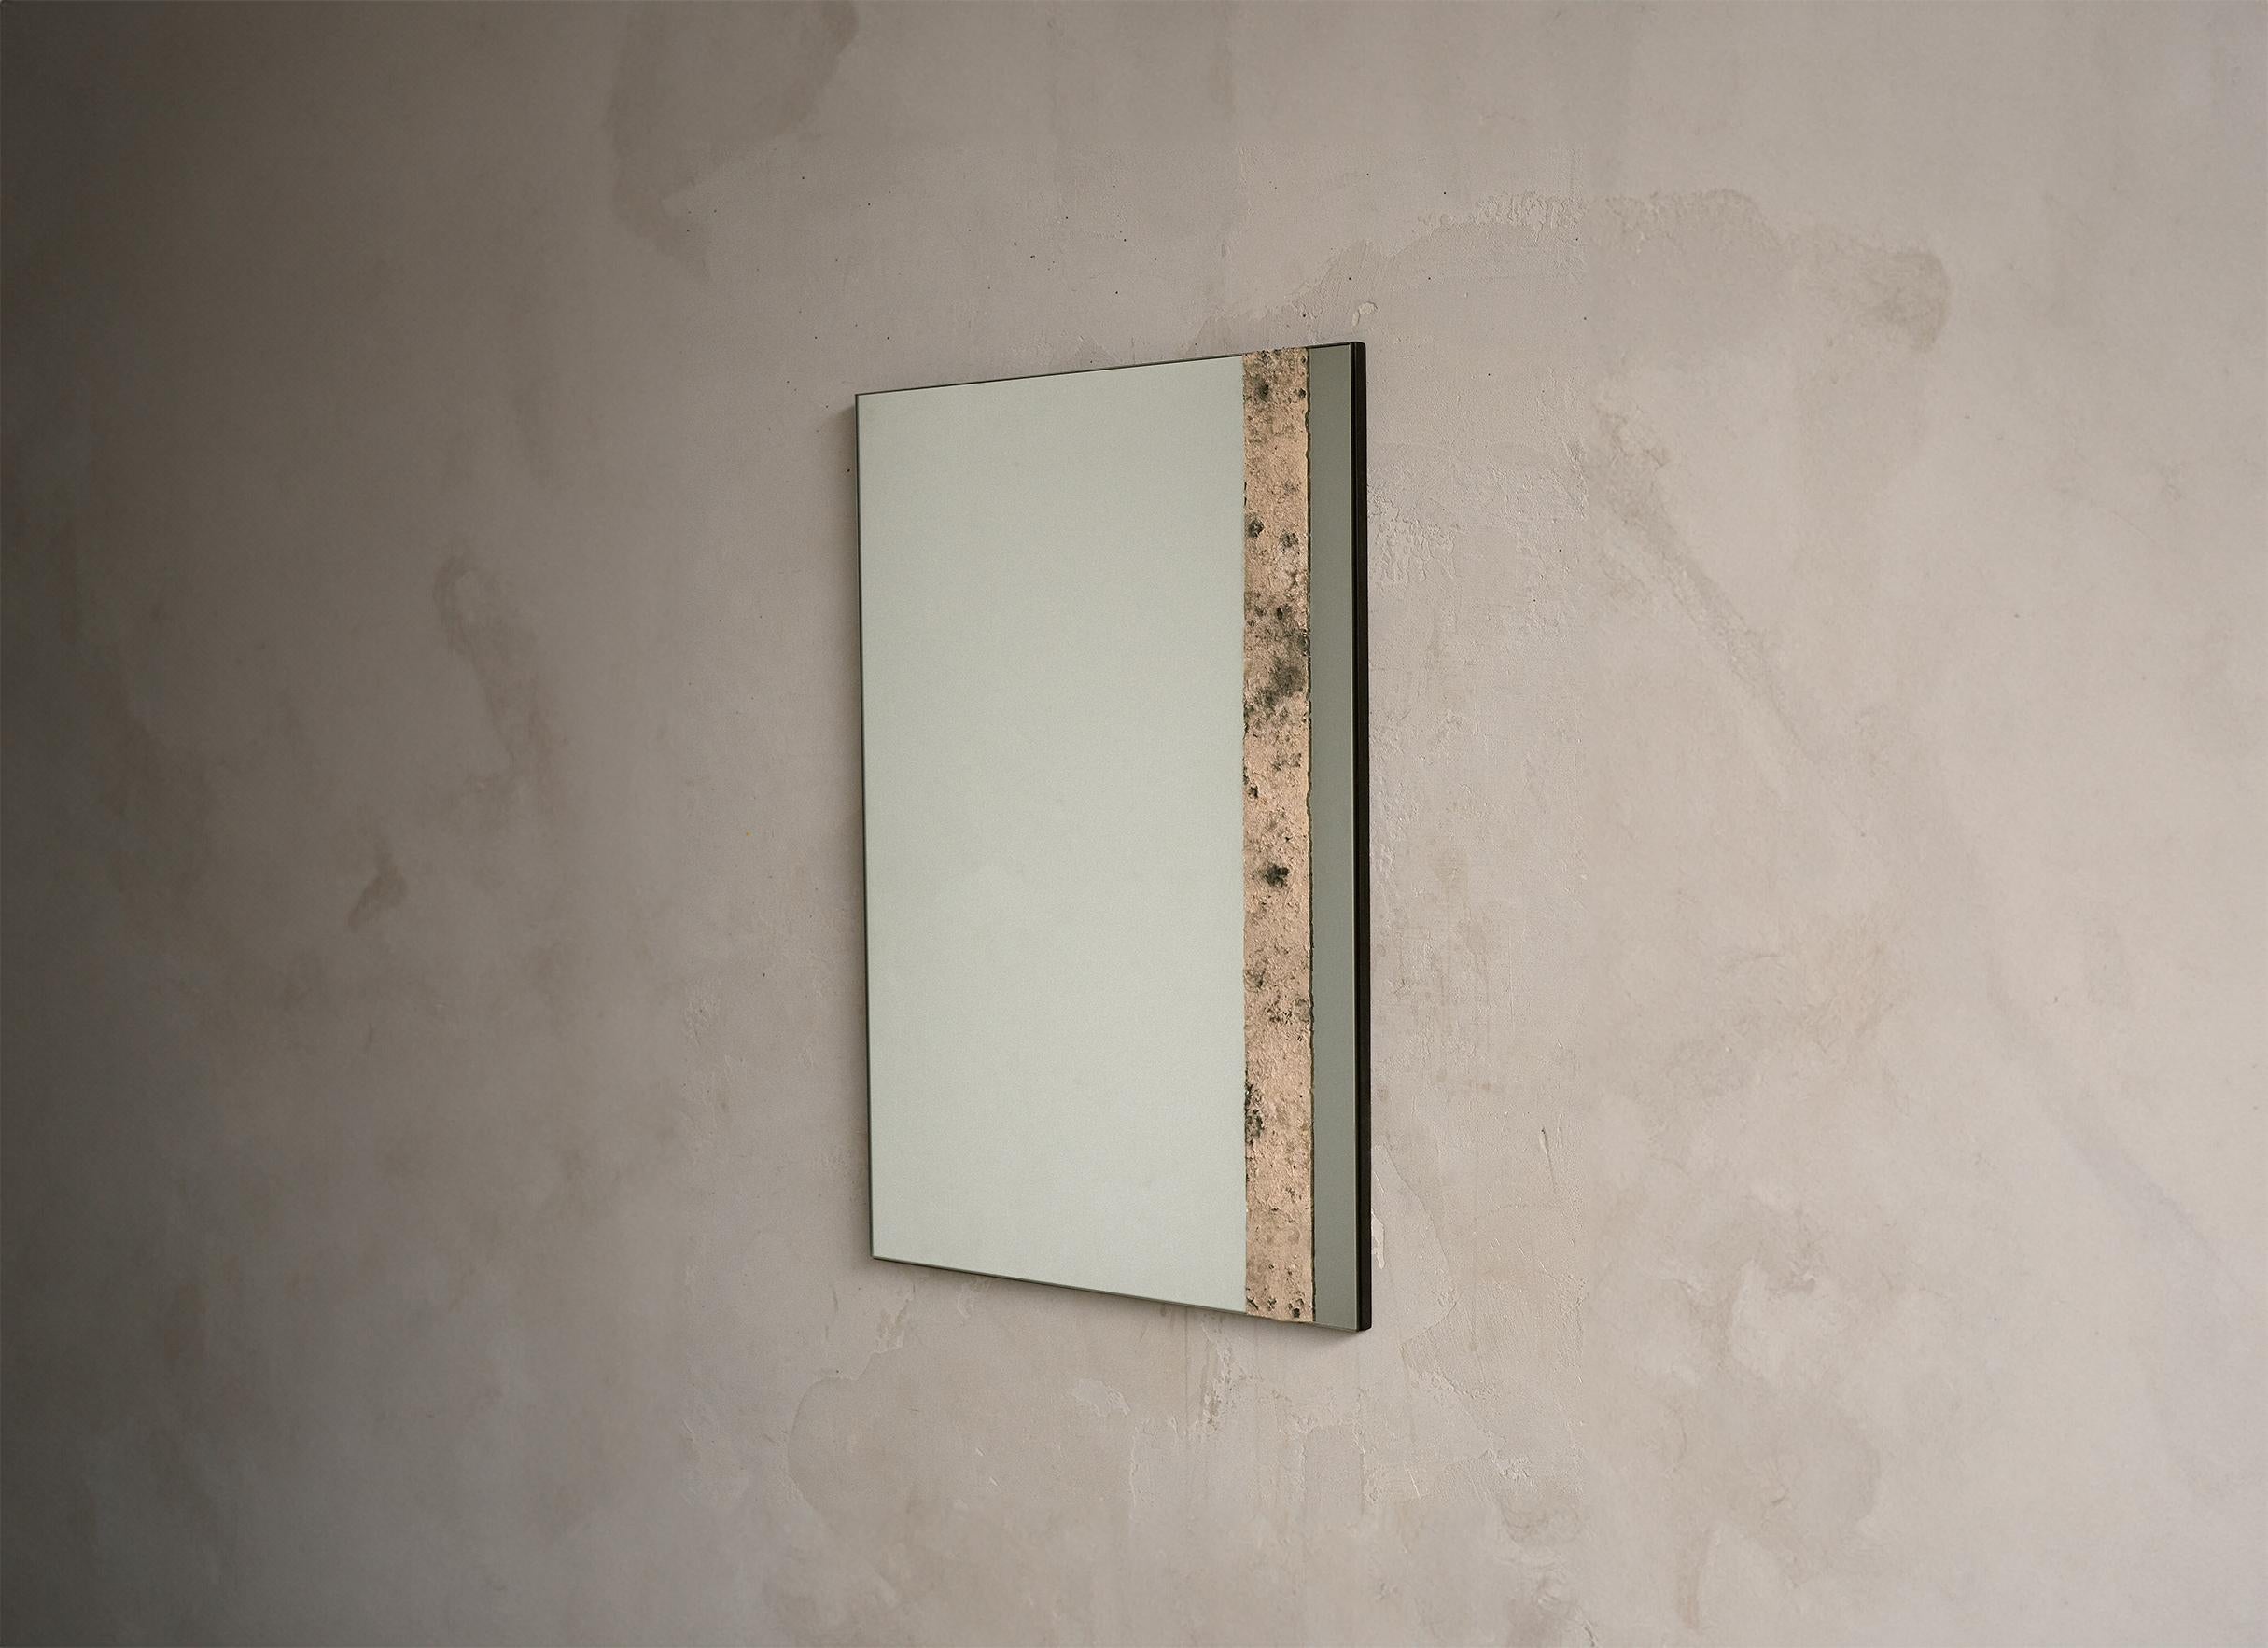 The Pompeii square mirror consists of burnt ash that is hand-spread and worked.

*Burnt ash shape and color is organic and may differ from piece to piece to keep uniqueness in the artists own hand and technique.